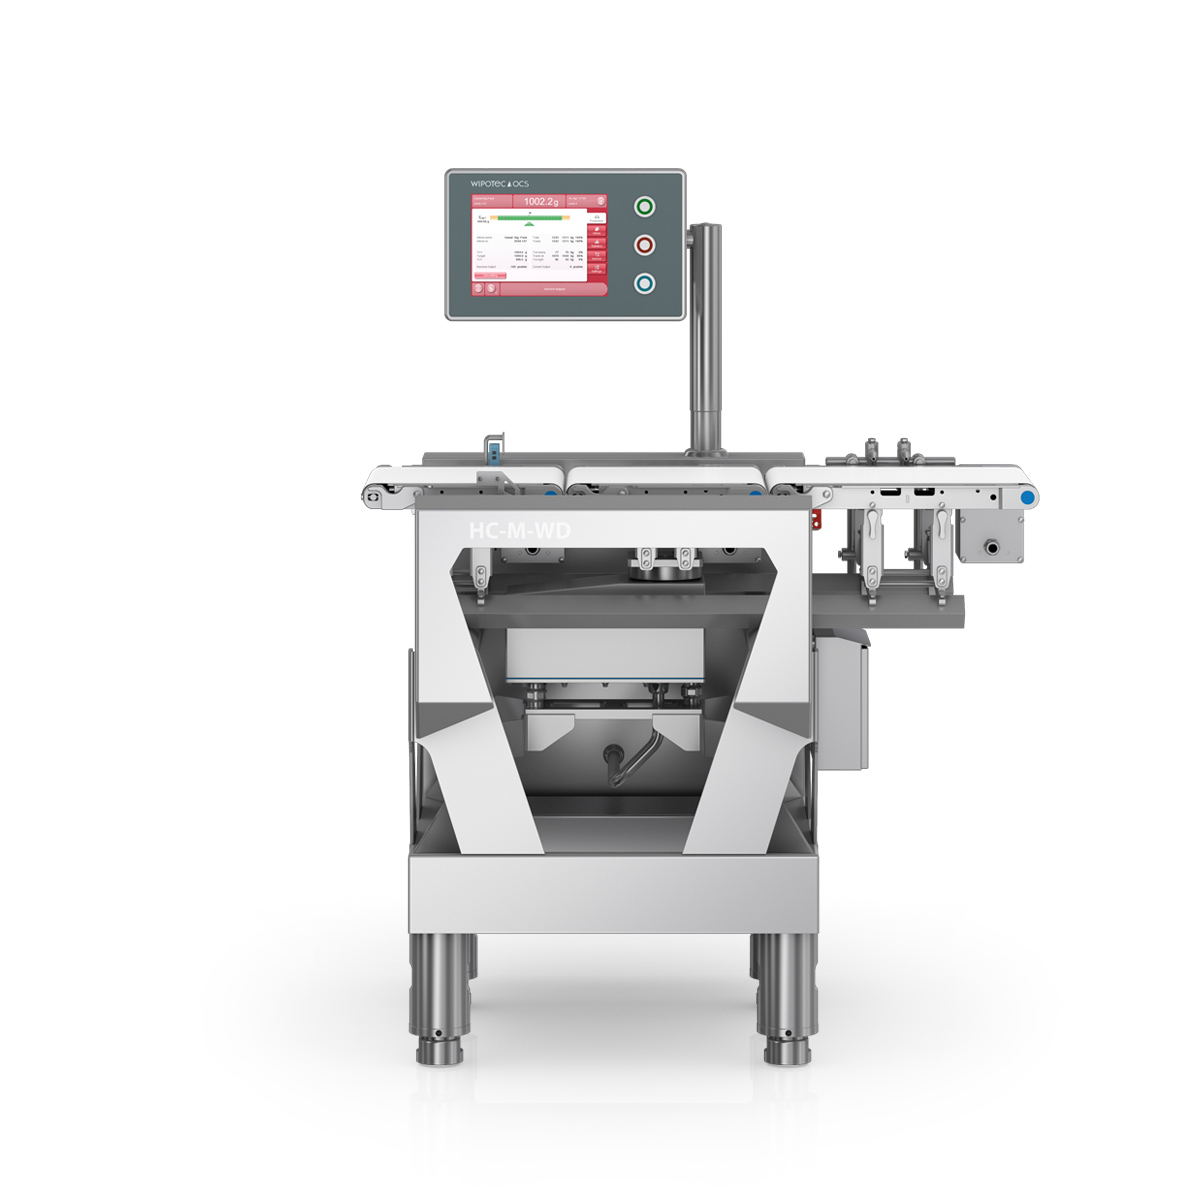 Checkweigher to meet the highest hygiene standards